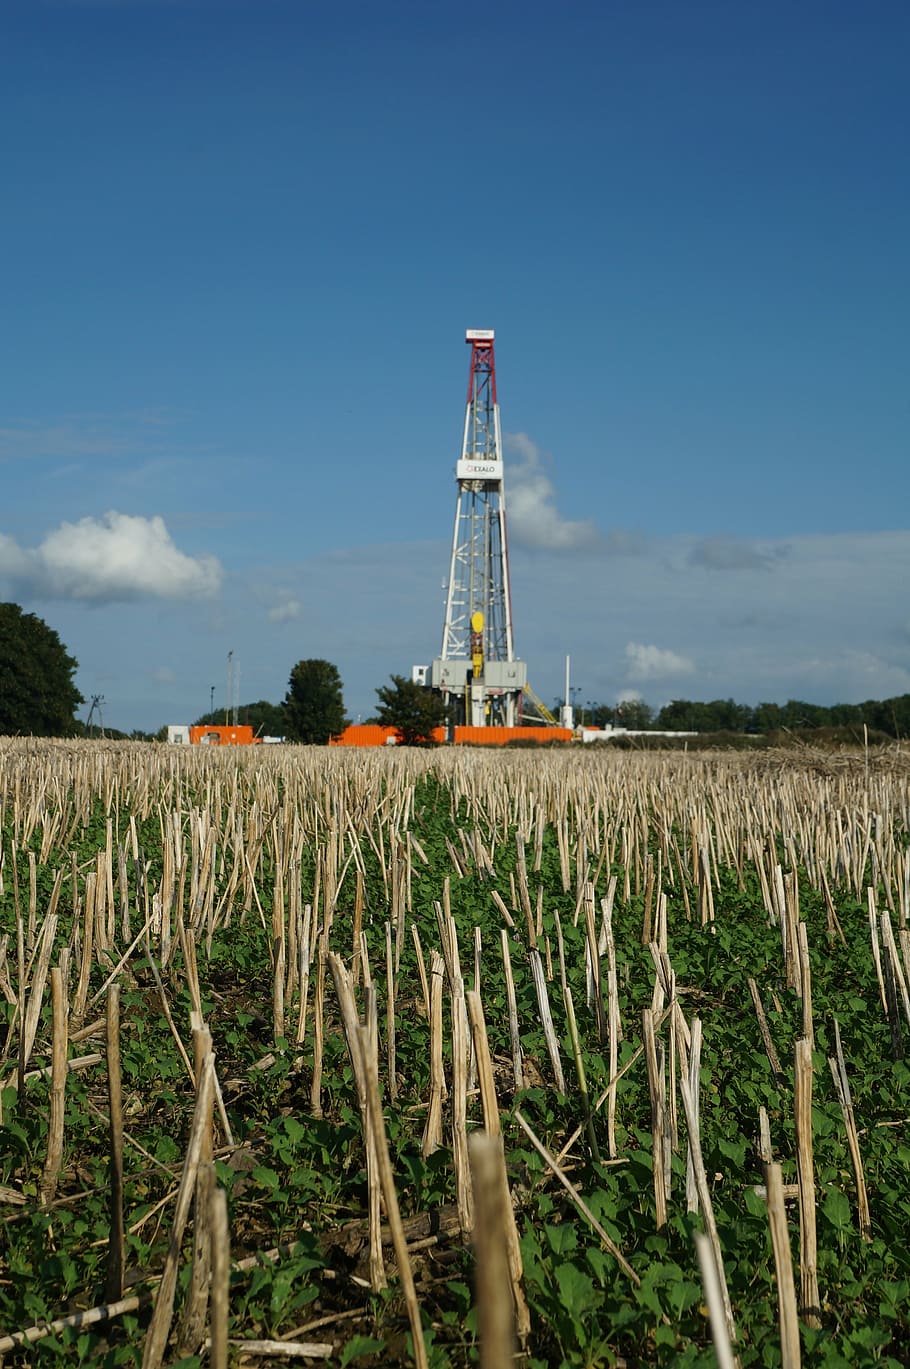 gas, oil rig, drilling rig, sky, plant, field, land, nature, agriculture, tower